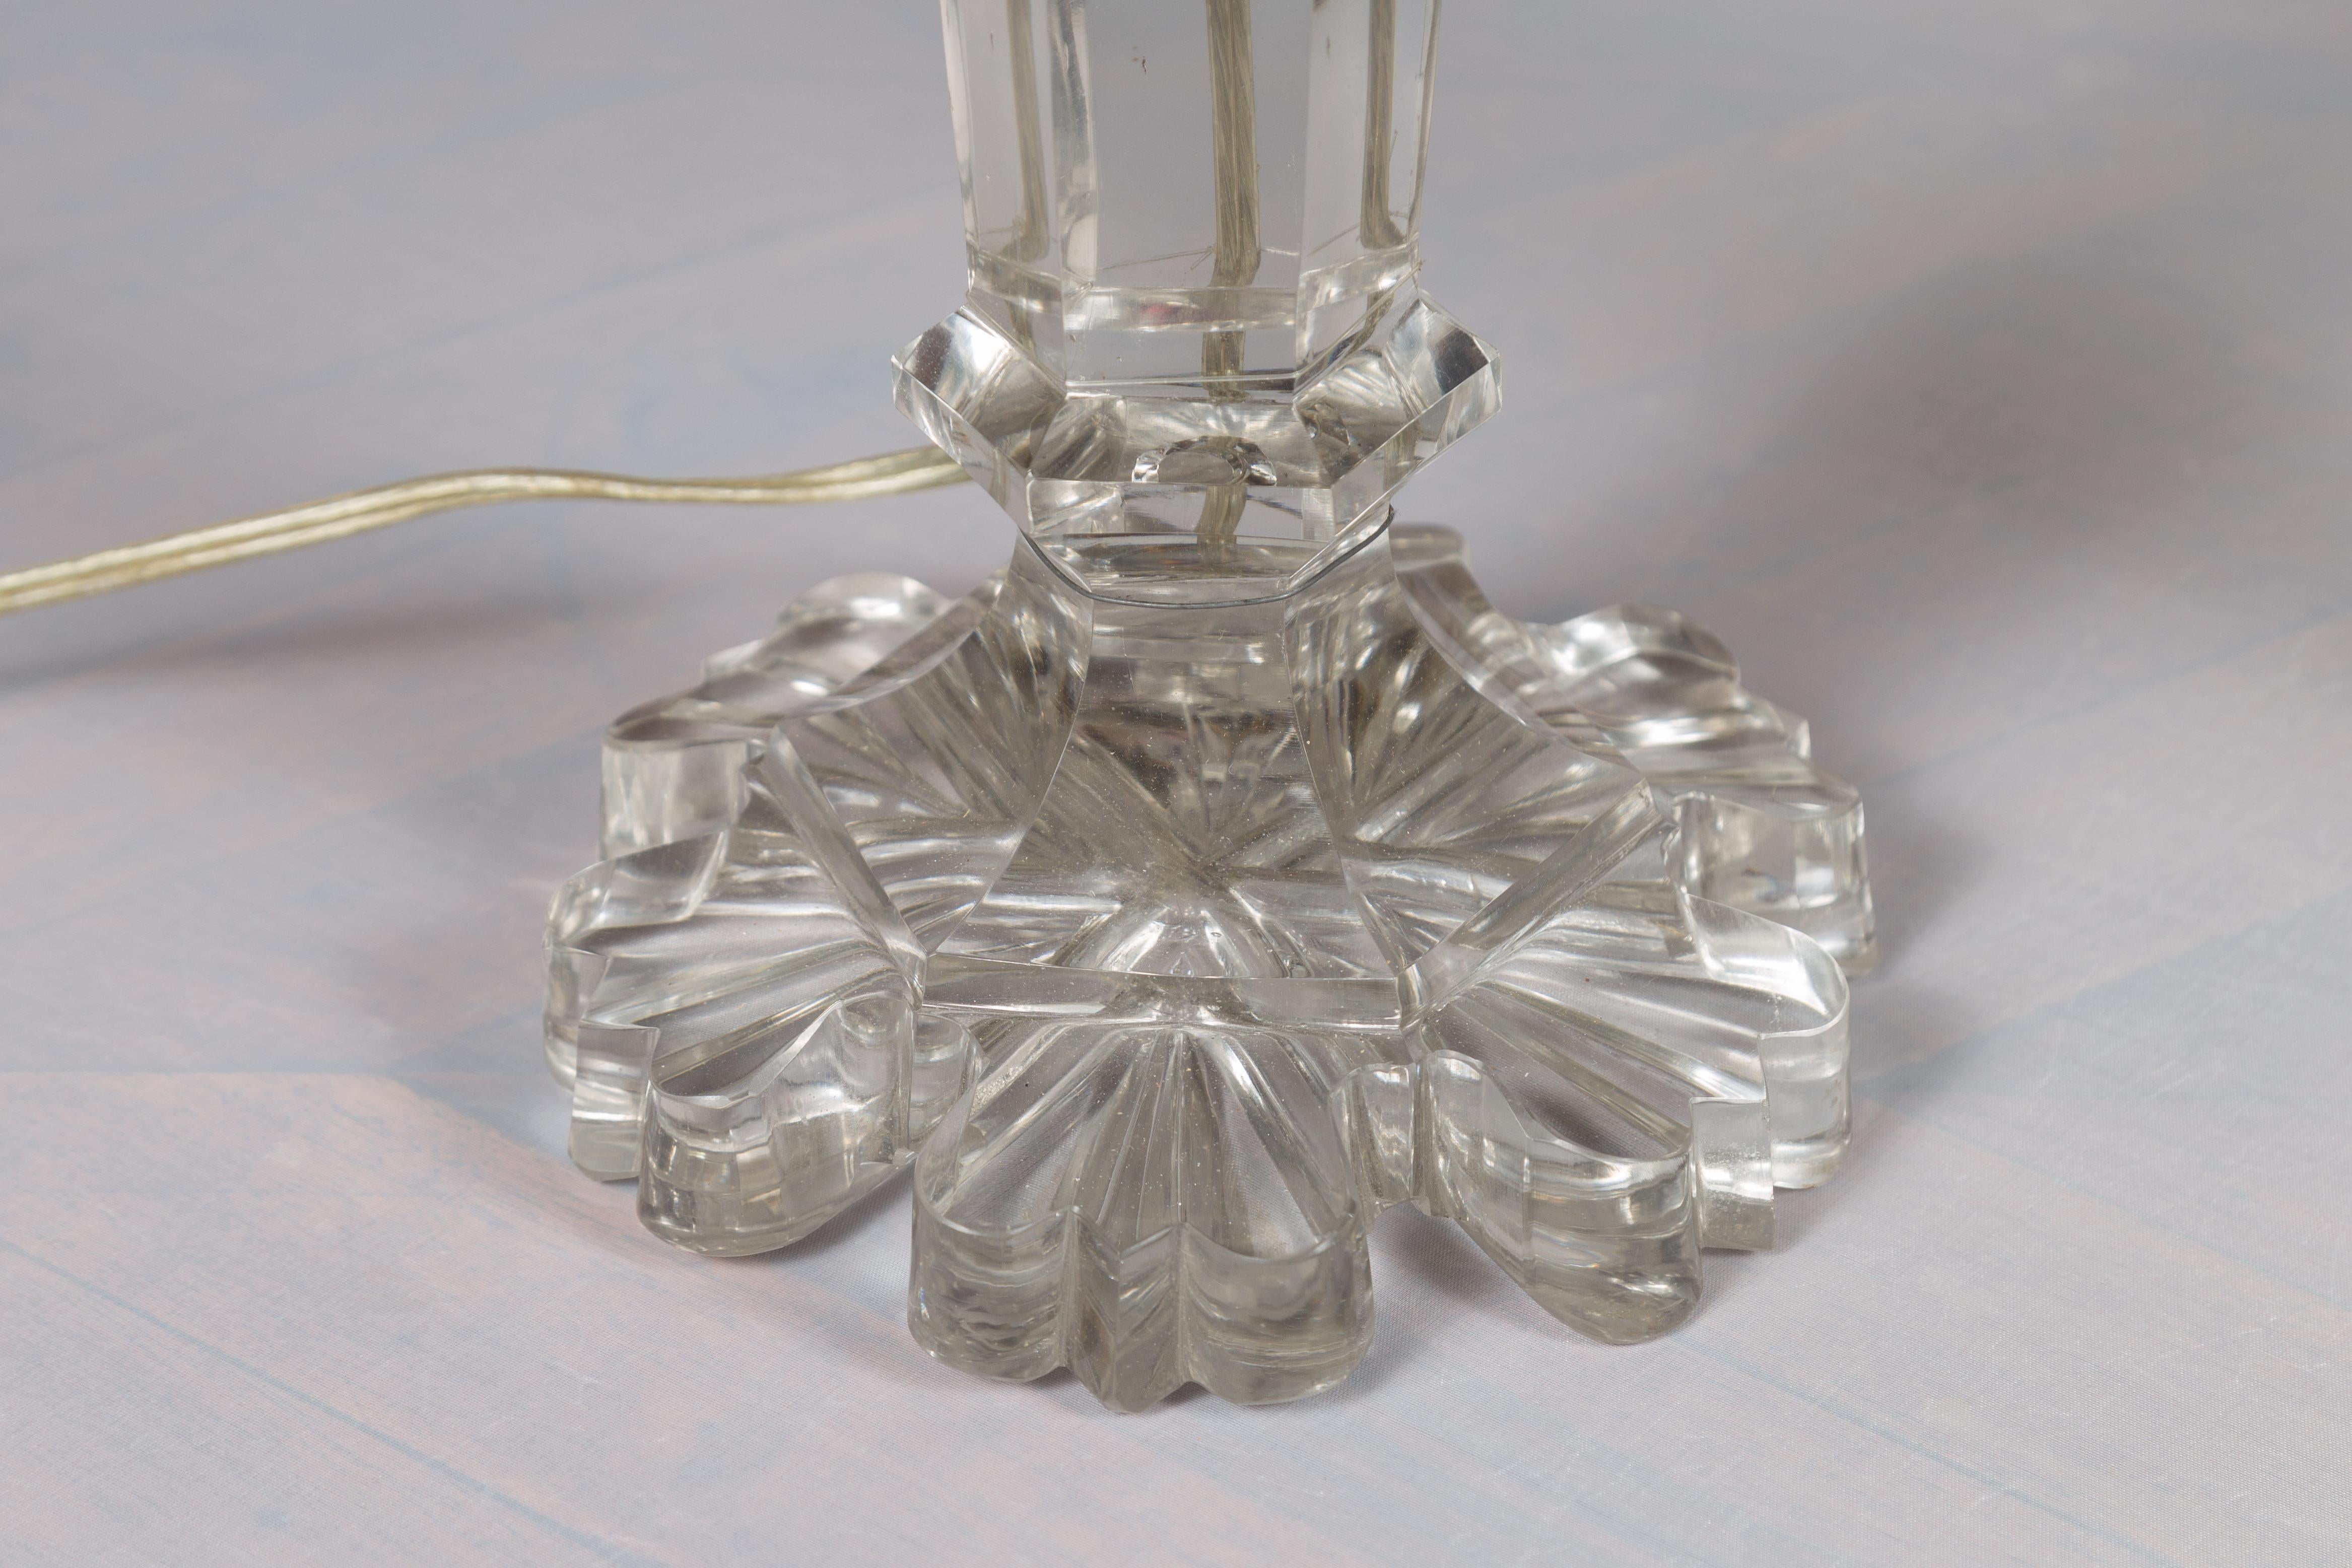 A pair of Irish crystal two-lights table lamps from the mid-19th century, with floral shaped bases. Created in Ireland during the 1850s, each of this pair of table lamps features a hexagonal crystal base resting on a floral motif, supporting a